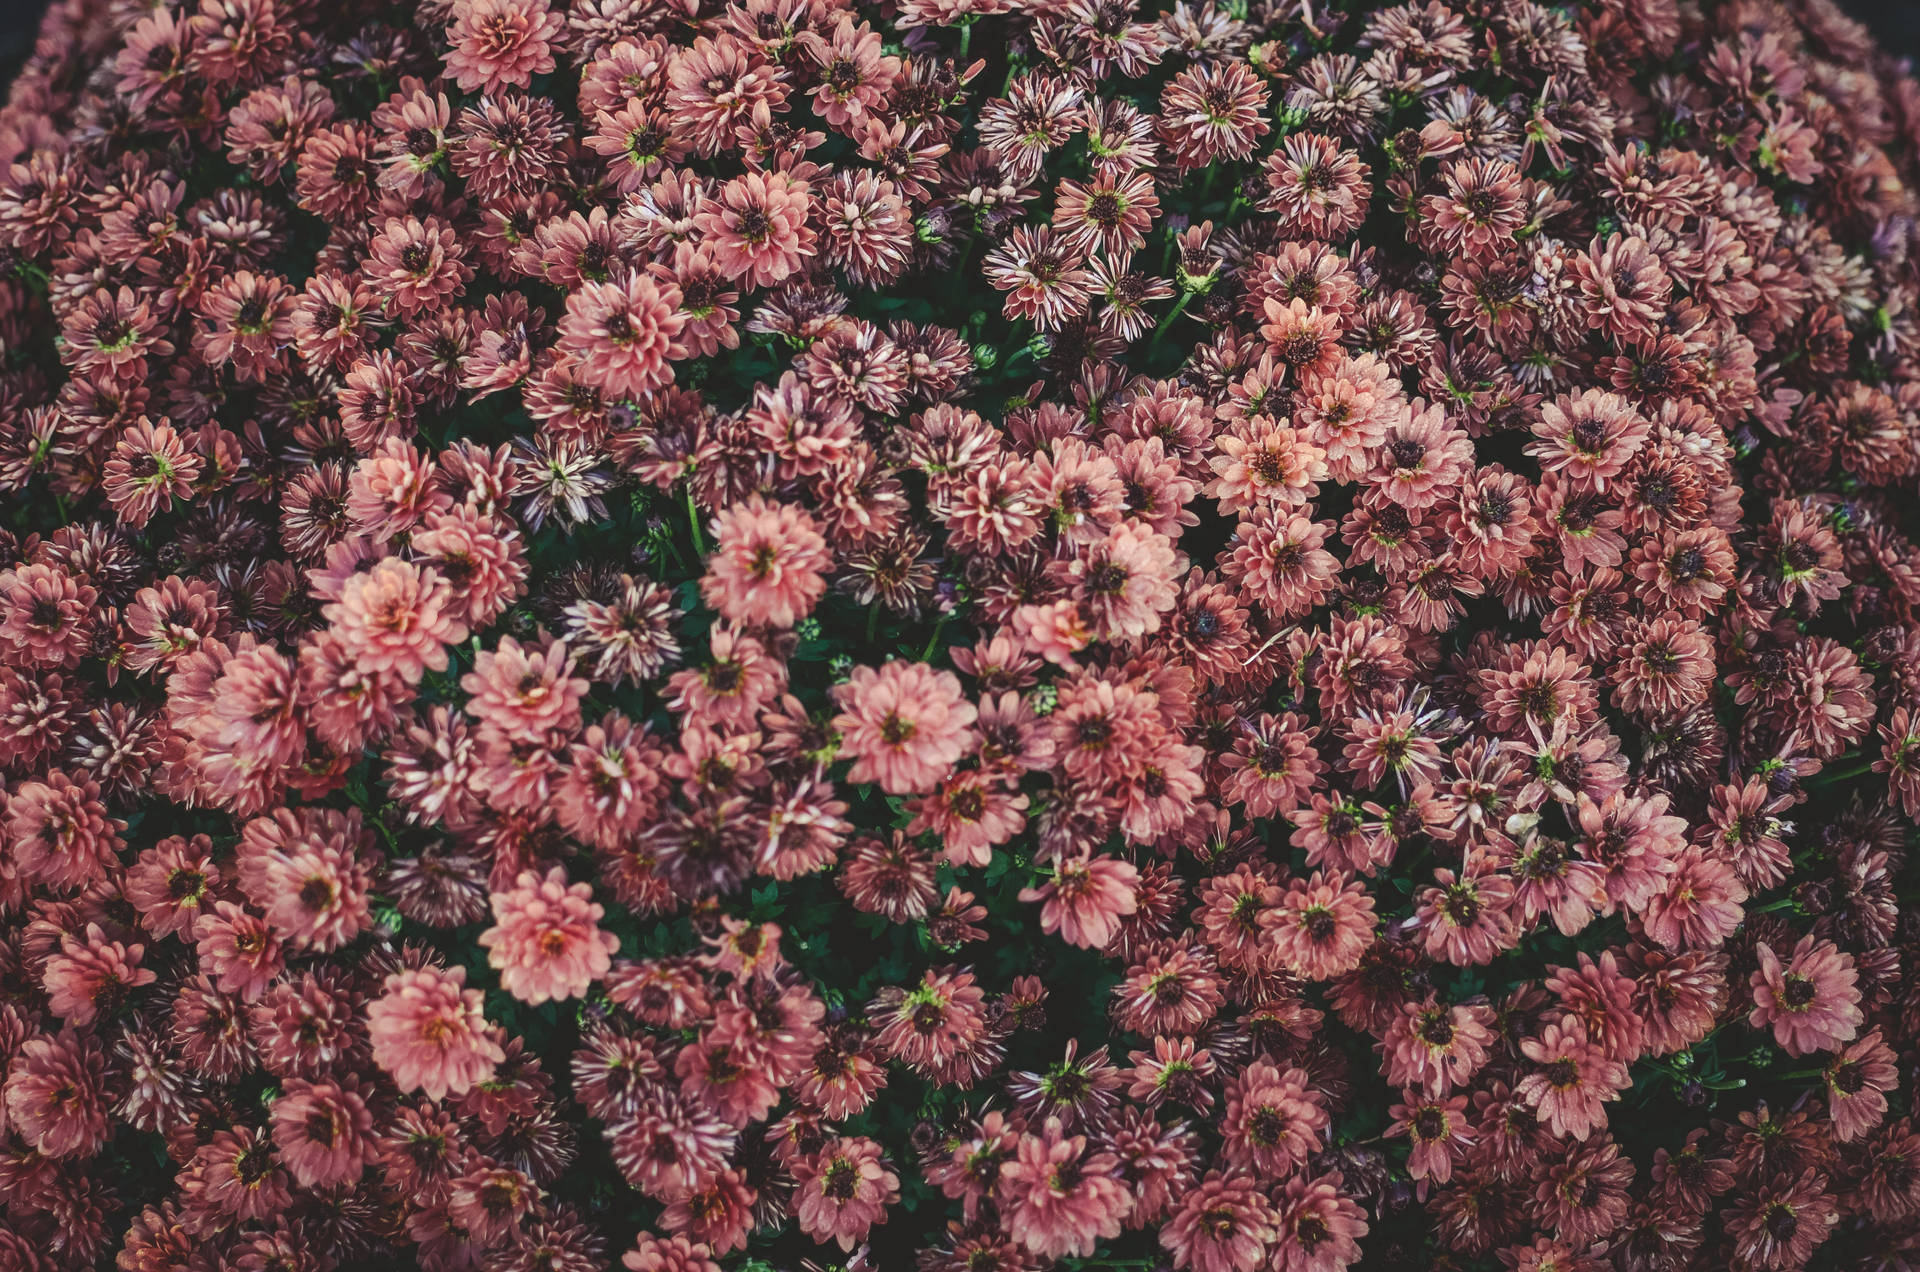 Bed Of Pink Aesthetic Flowers